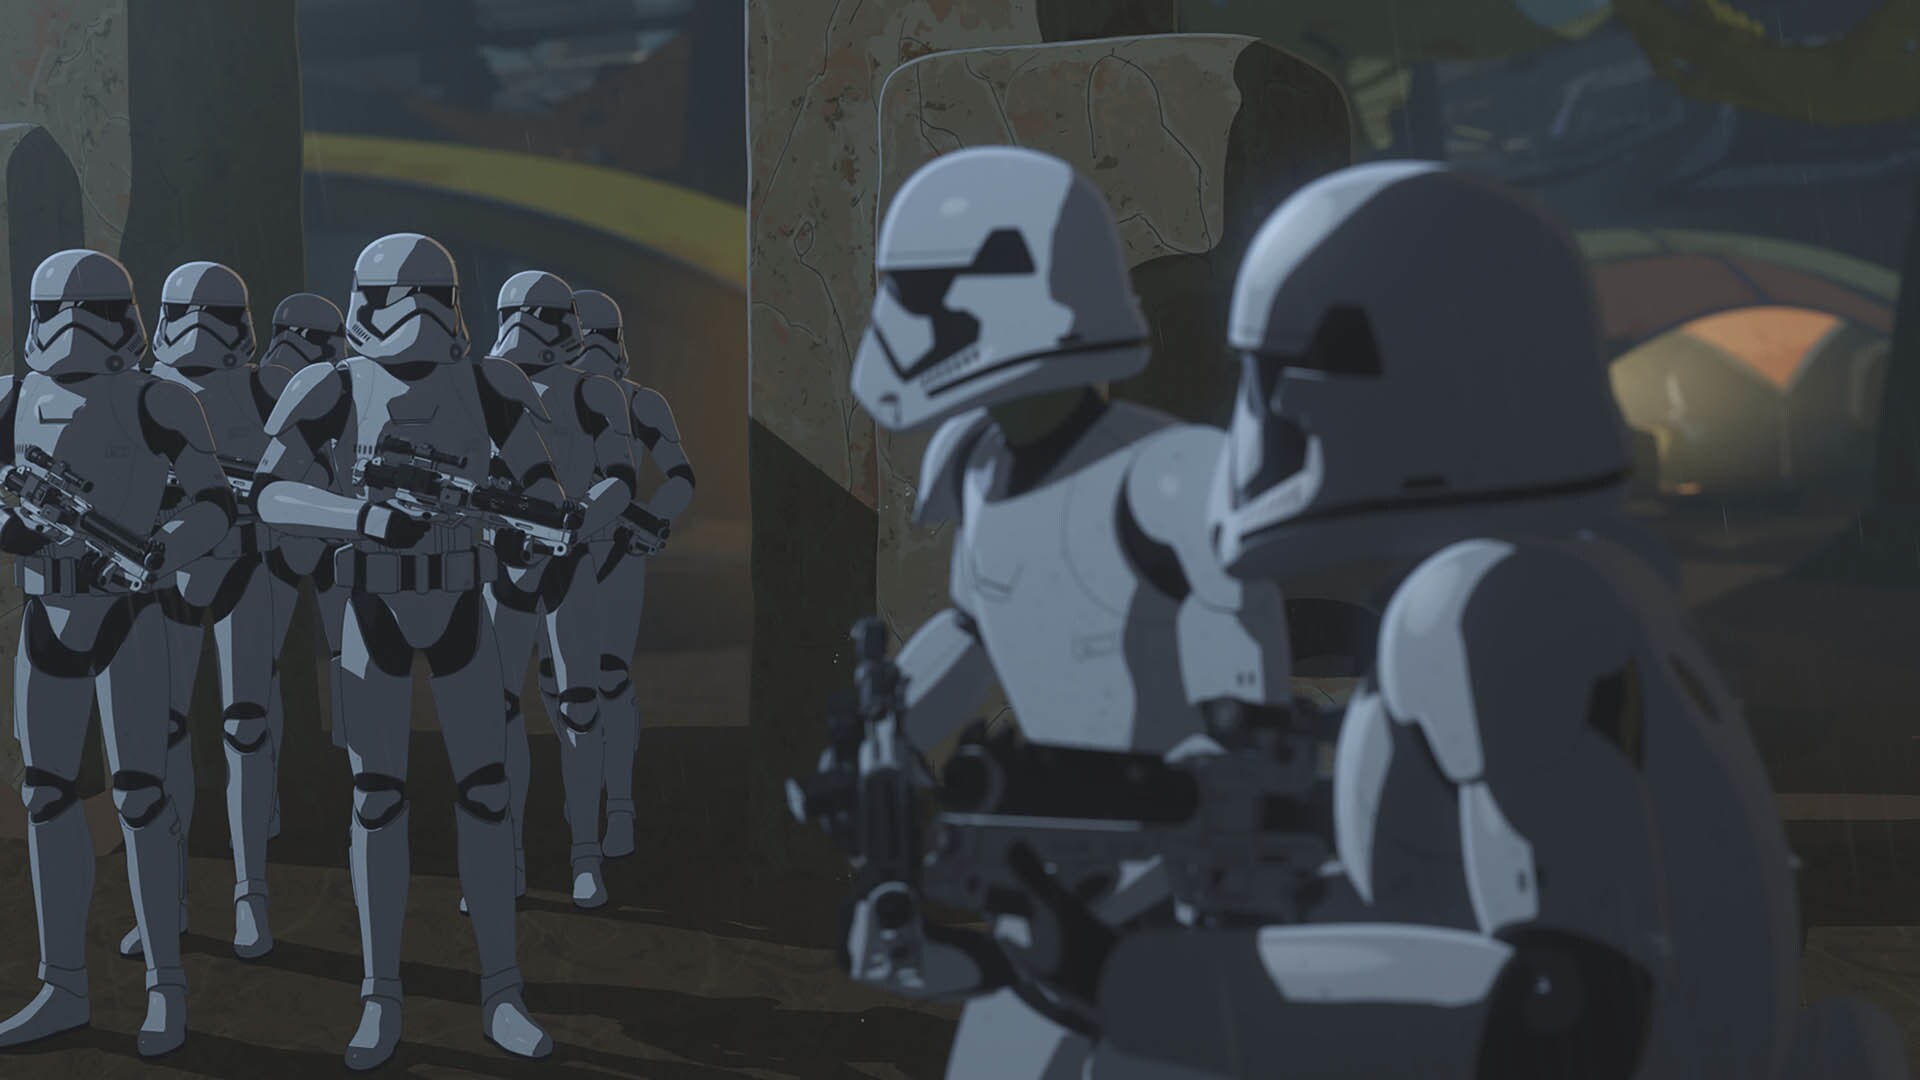 Finally, Kaz has an idea: they'll ambush a couple of stormtroopers, steal their armor, and sneak ...